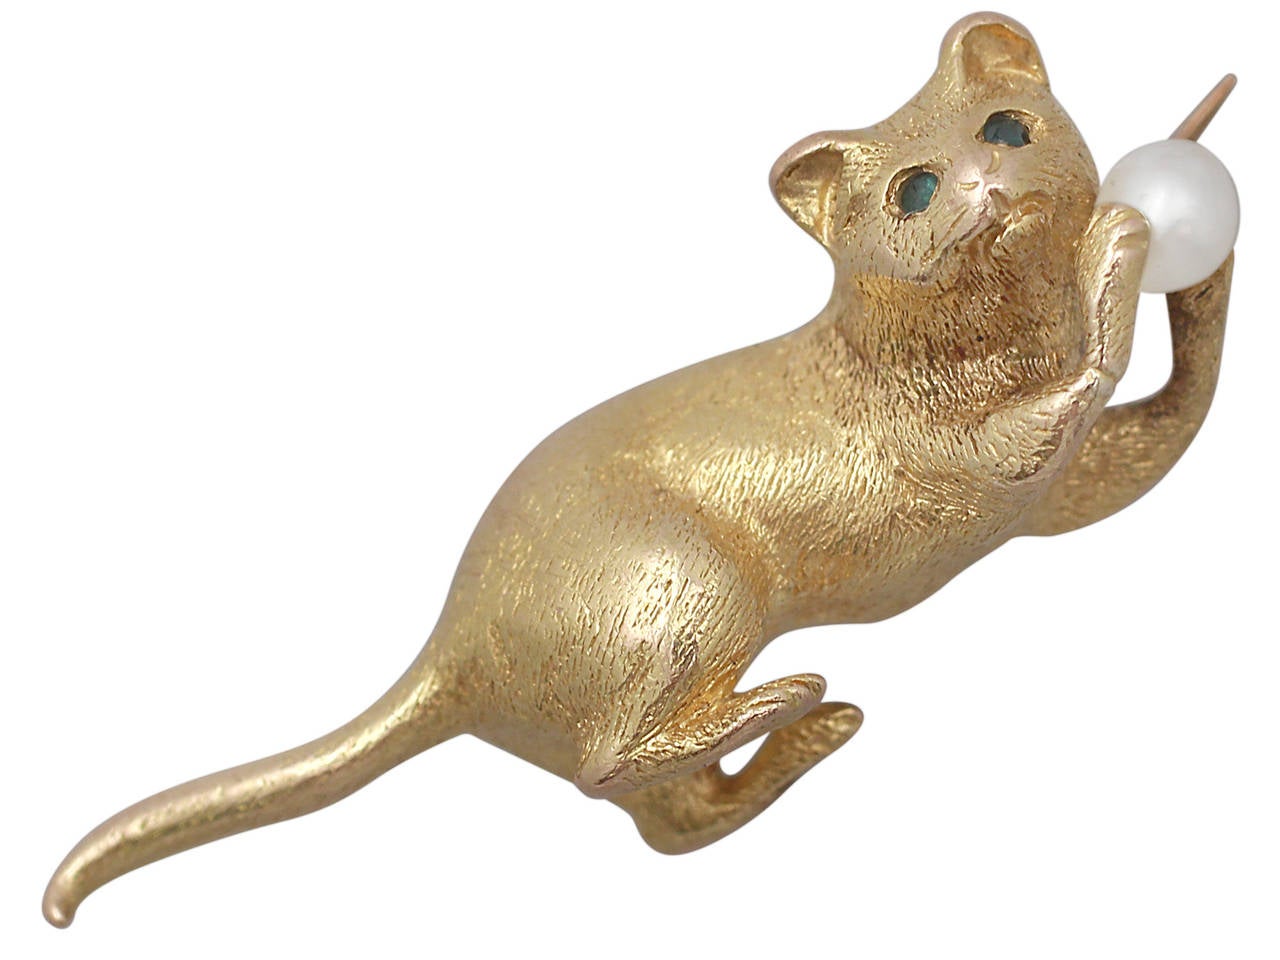 A fine and impressive antique natural emerald and pearl, 18 karat yellow gold brooch in the form of a cat; part of our antique jewelry and estate jewelry collections

This fine antique brooch has been crafted in 18k yellow gold in the form of a